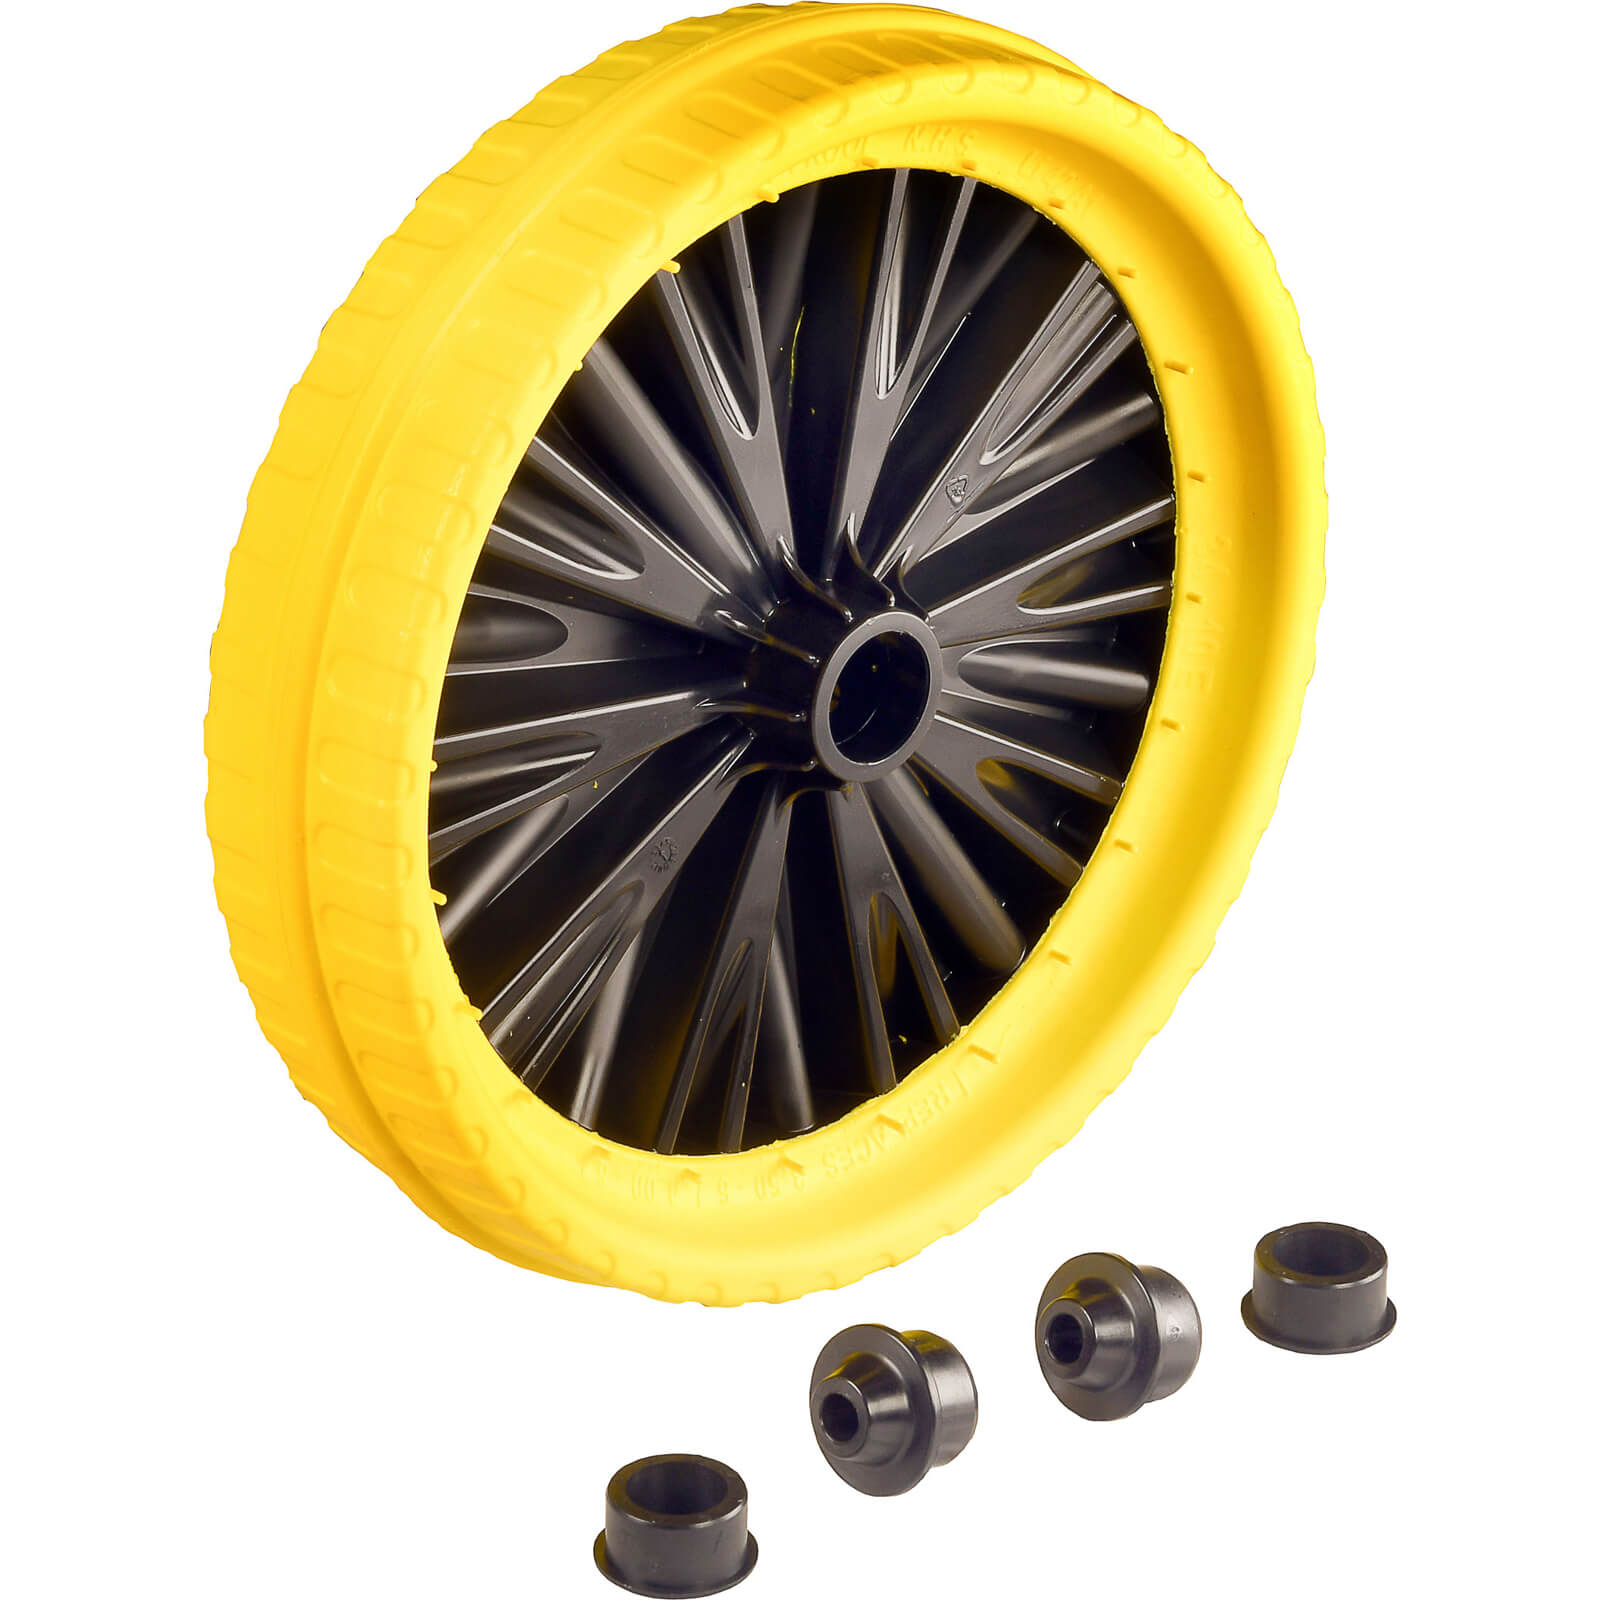 Image of Walsall Universal Titan Puncture Proof Wheel for Wheelbarrows